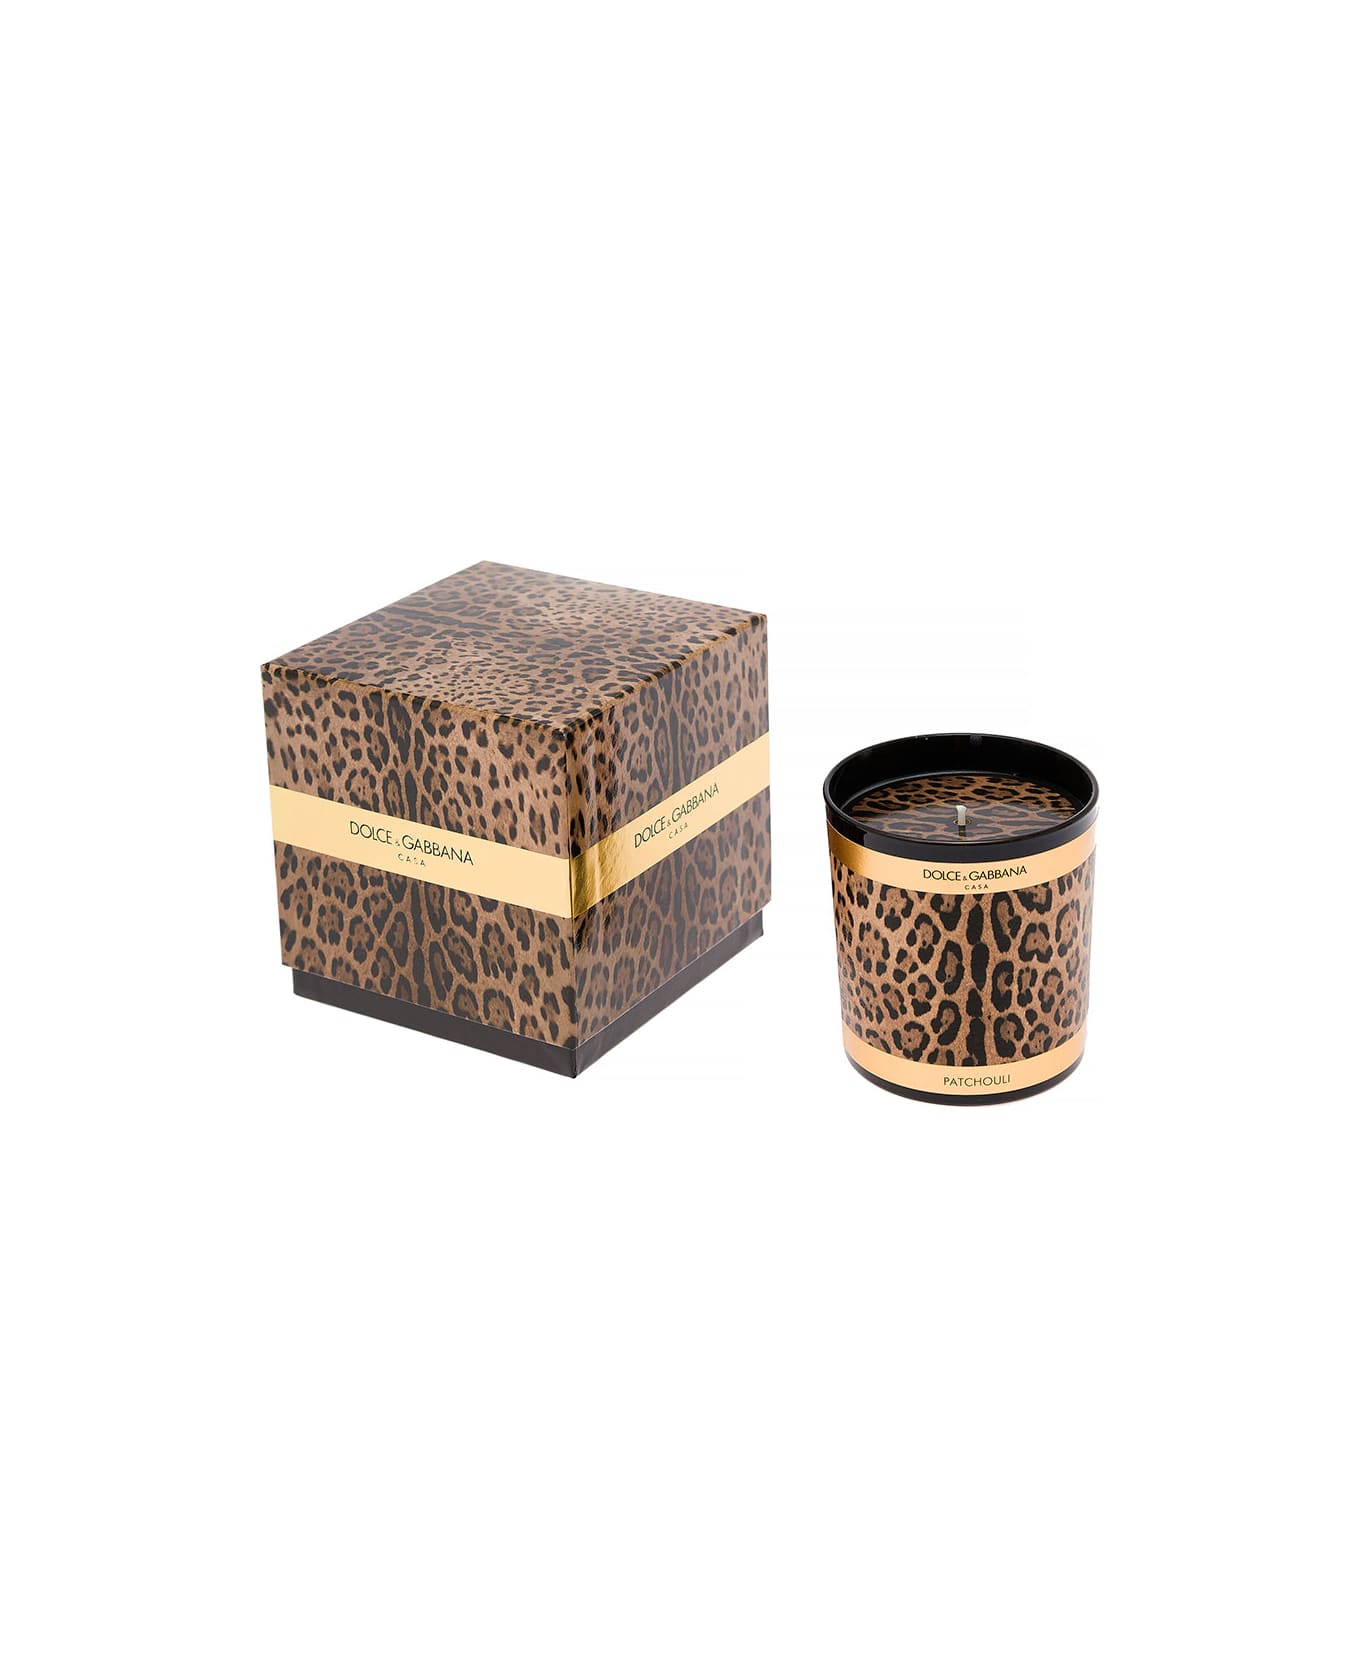 Dolce & Gabbana Patchouli Scented Candle With Leopard Print - Multicolor インテリア雑貨